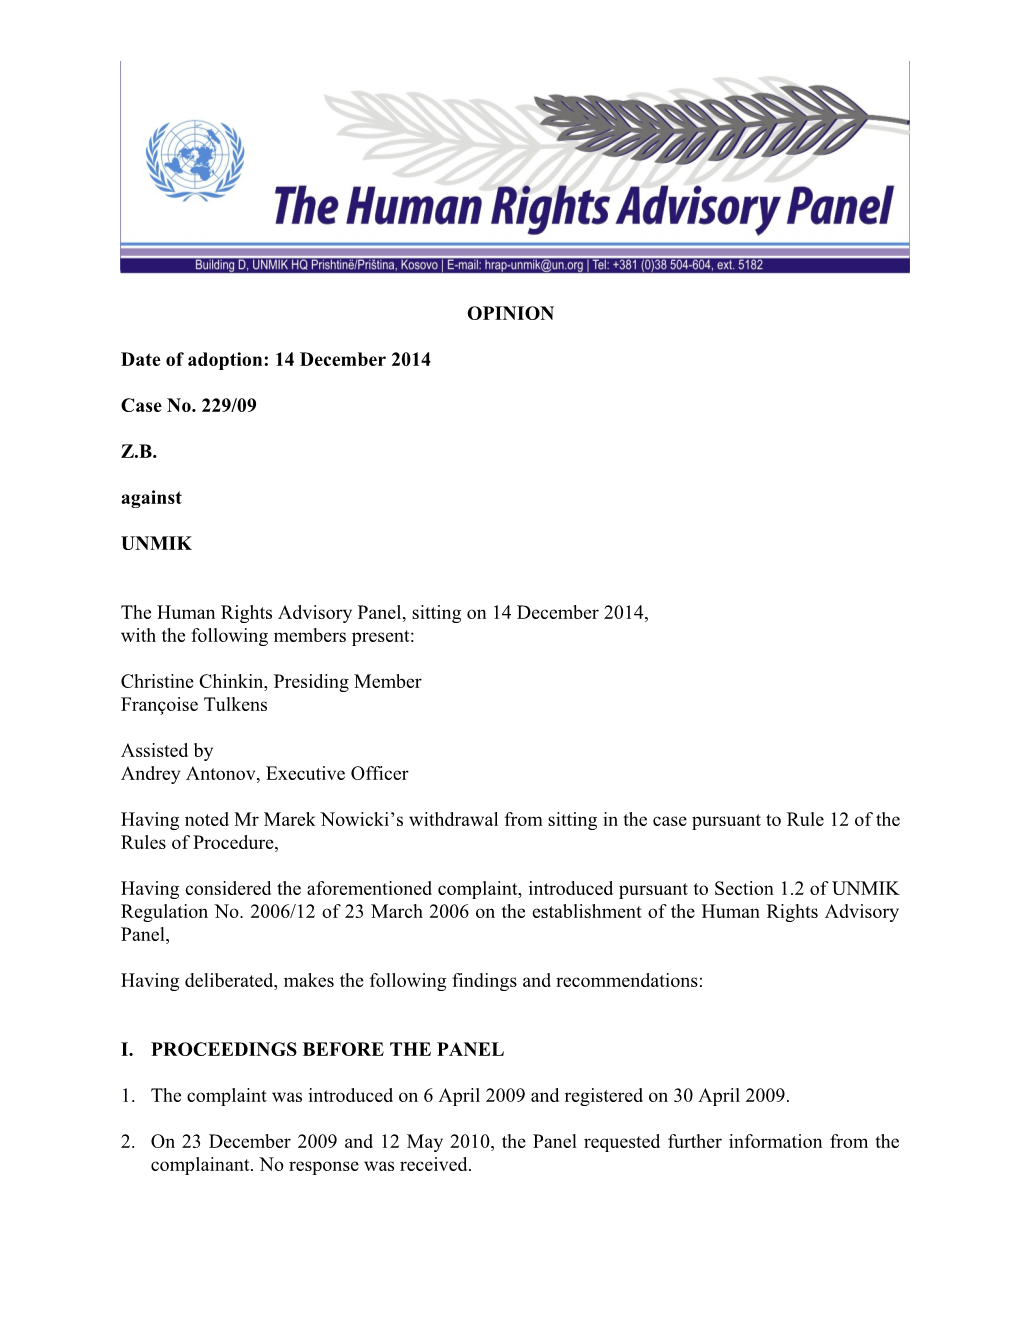 The Human Rights Advisory Panel,Sitting On14december 2014